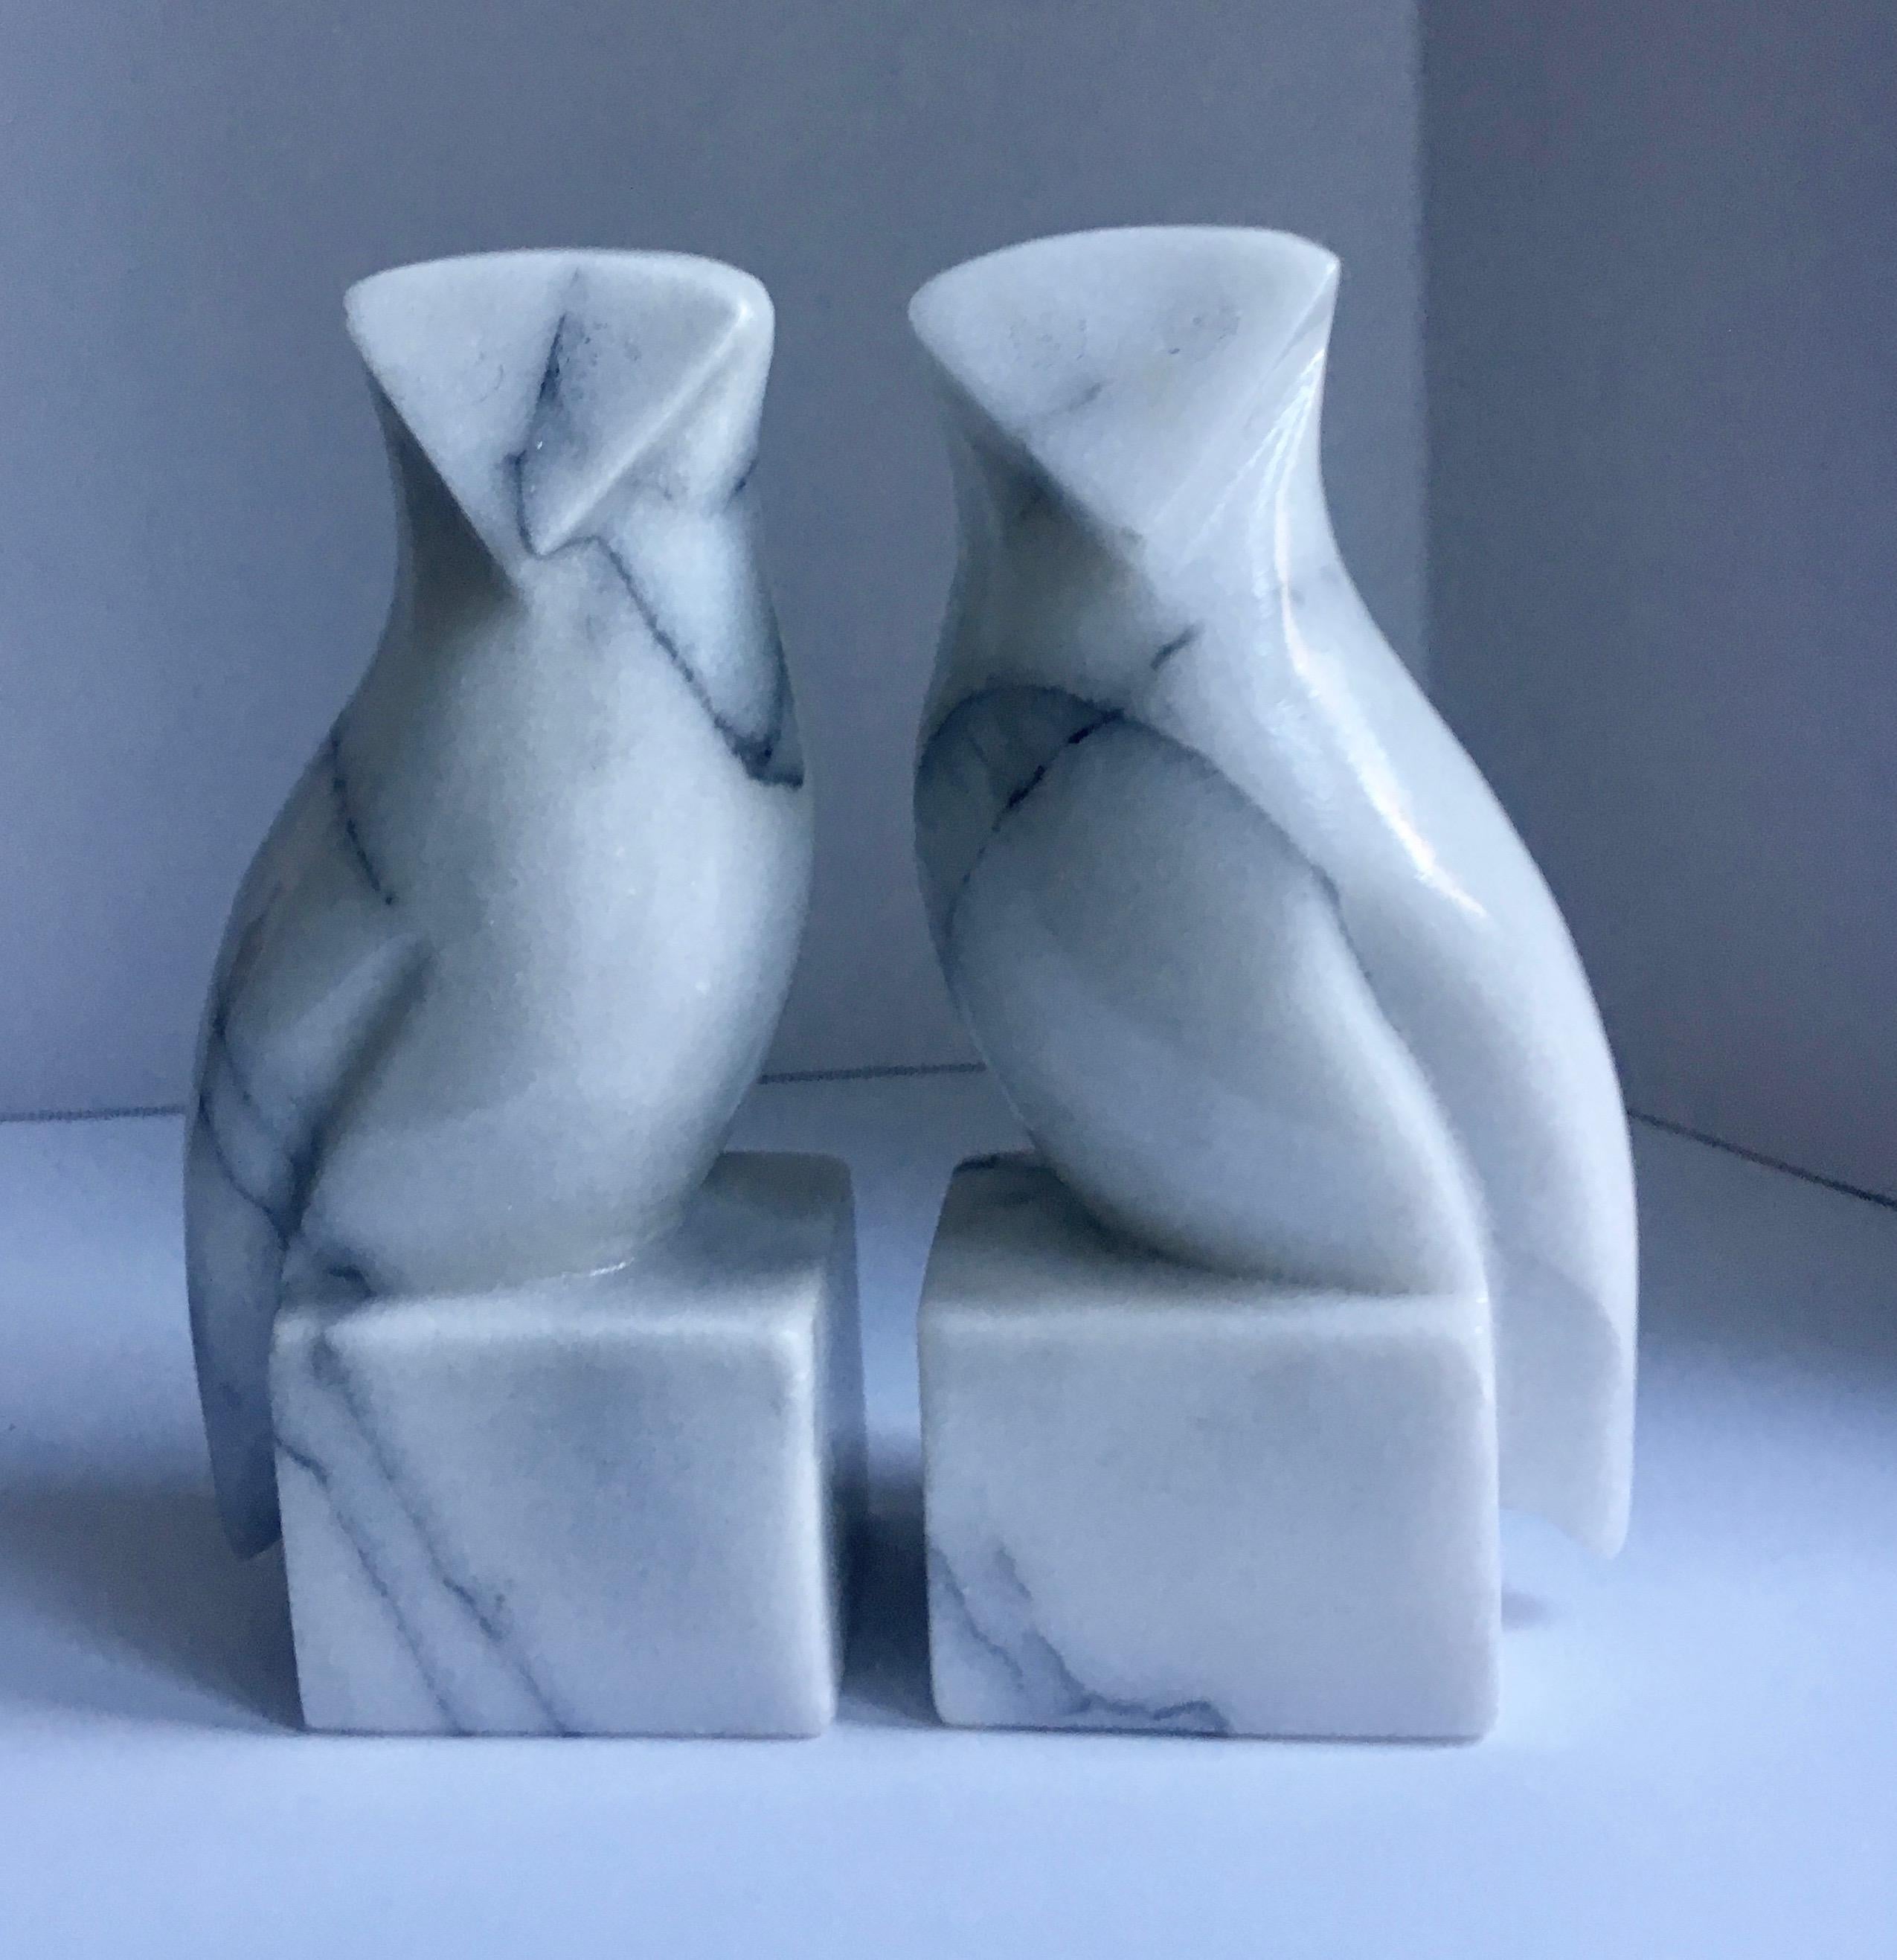 Pair of marble owl bookends - a very sleek and modern pair. Great for any owl lover or modern clean shelf or desk.